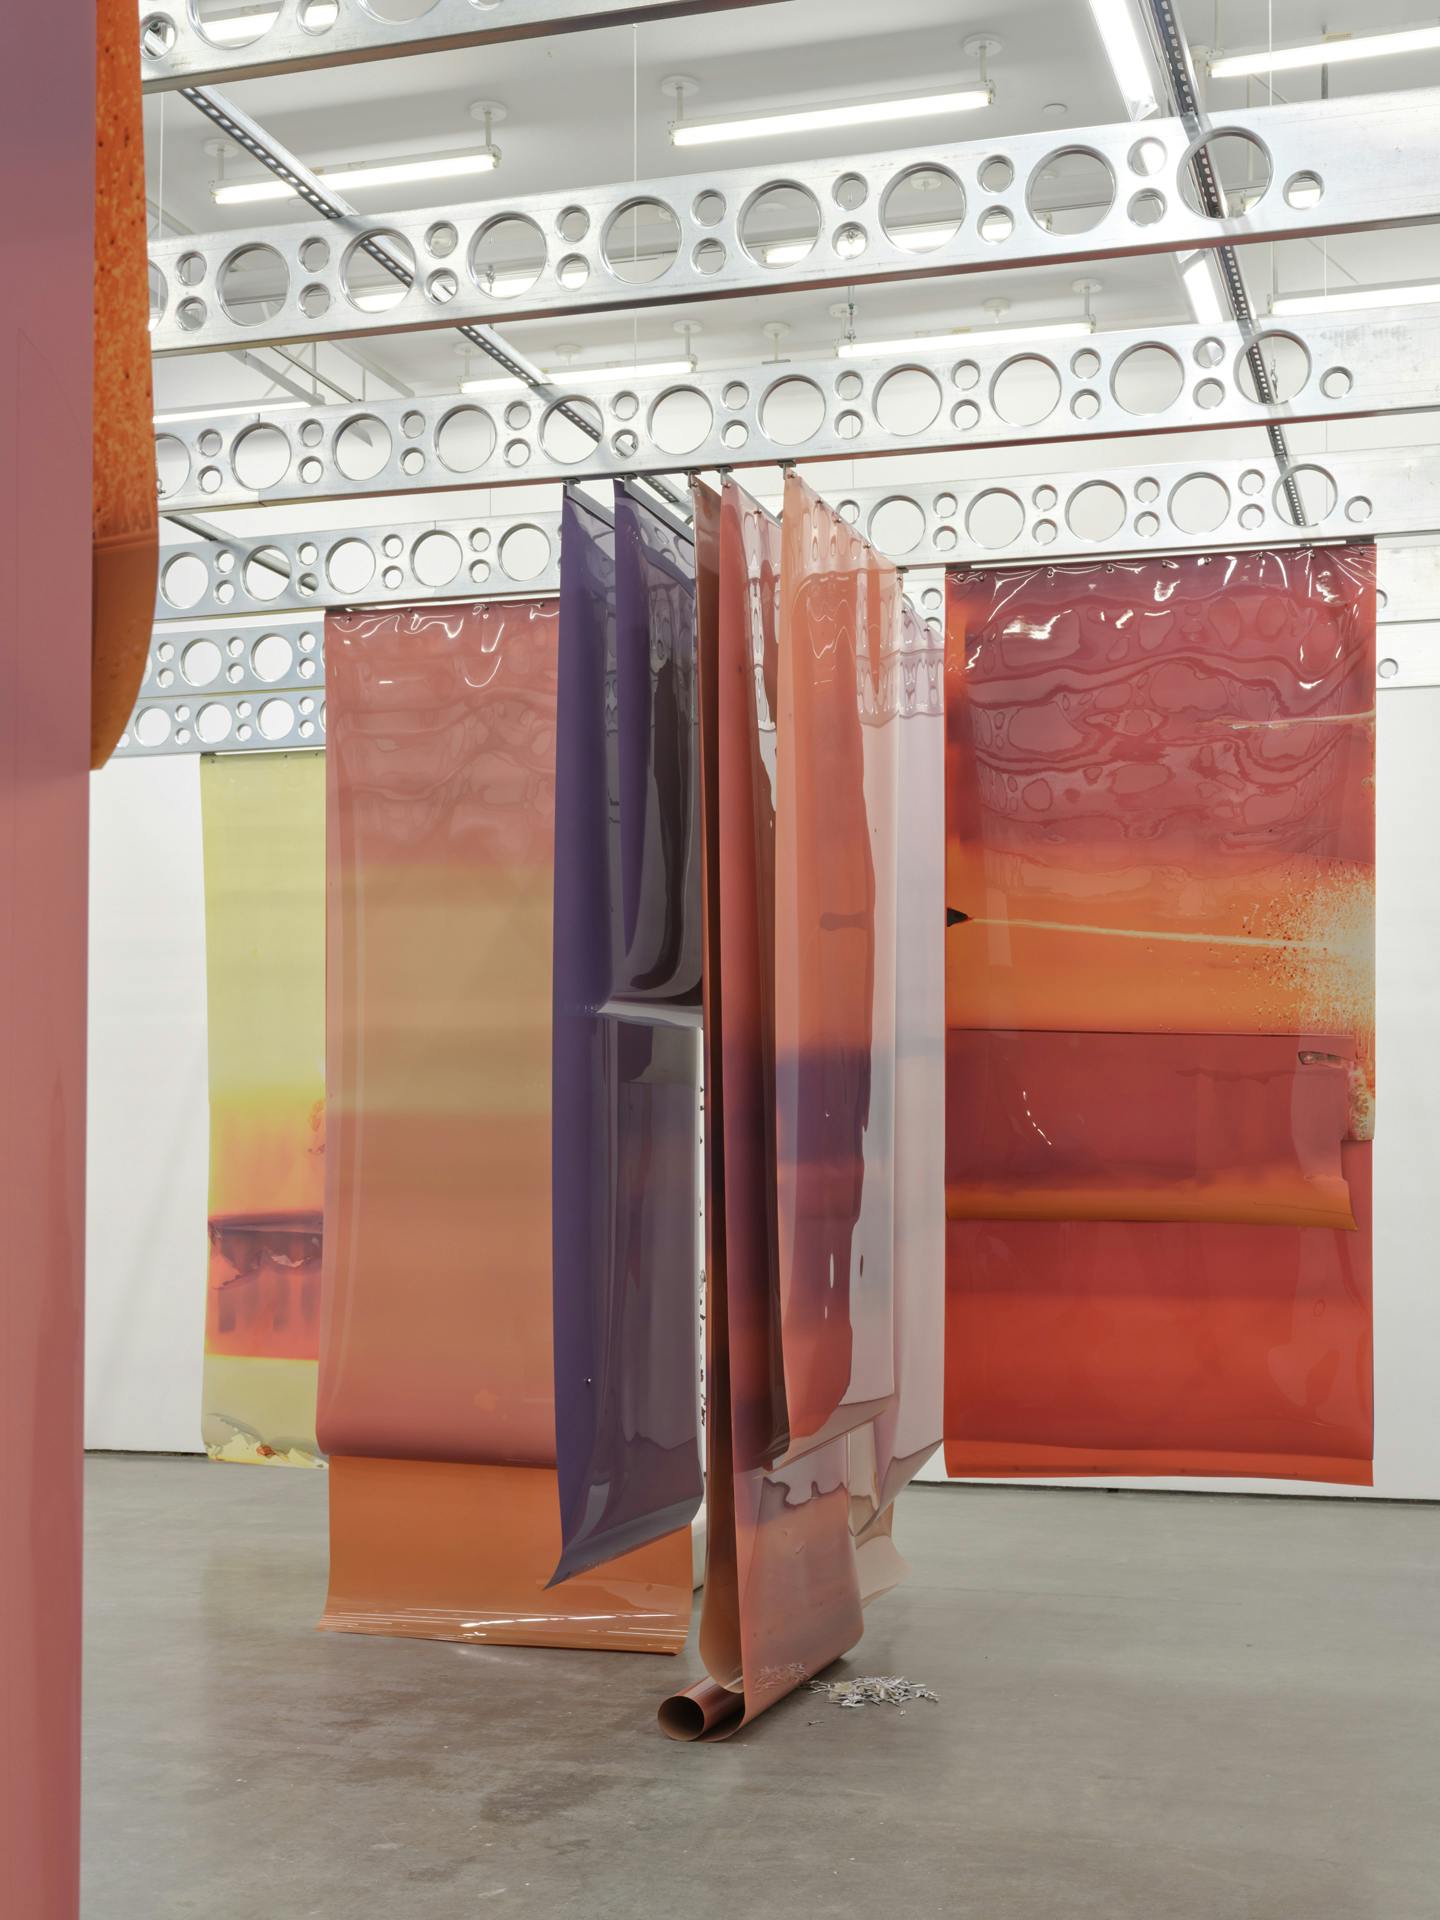 Long earth tone sheets of film of various colours are suspended from industrial steel ceiling beams. The edge of one sheet is visible along the side of the image.